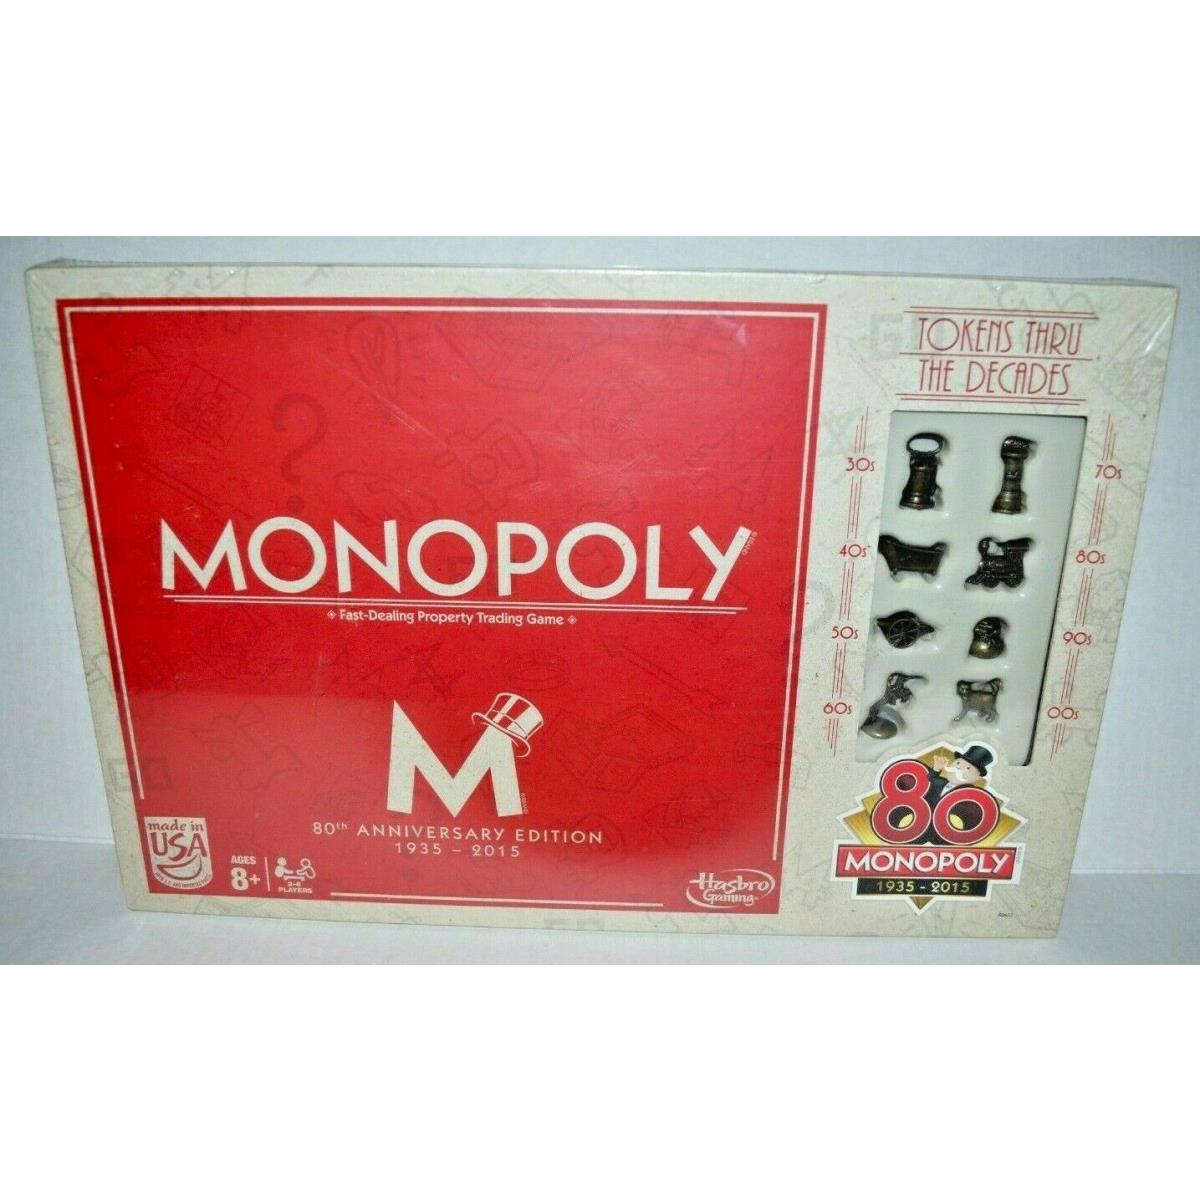 Hasbro Monopoly 80th Anniversary Edition Family Board Game Tokens From 1935 to 2015